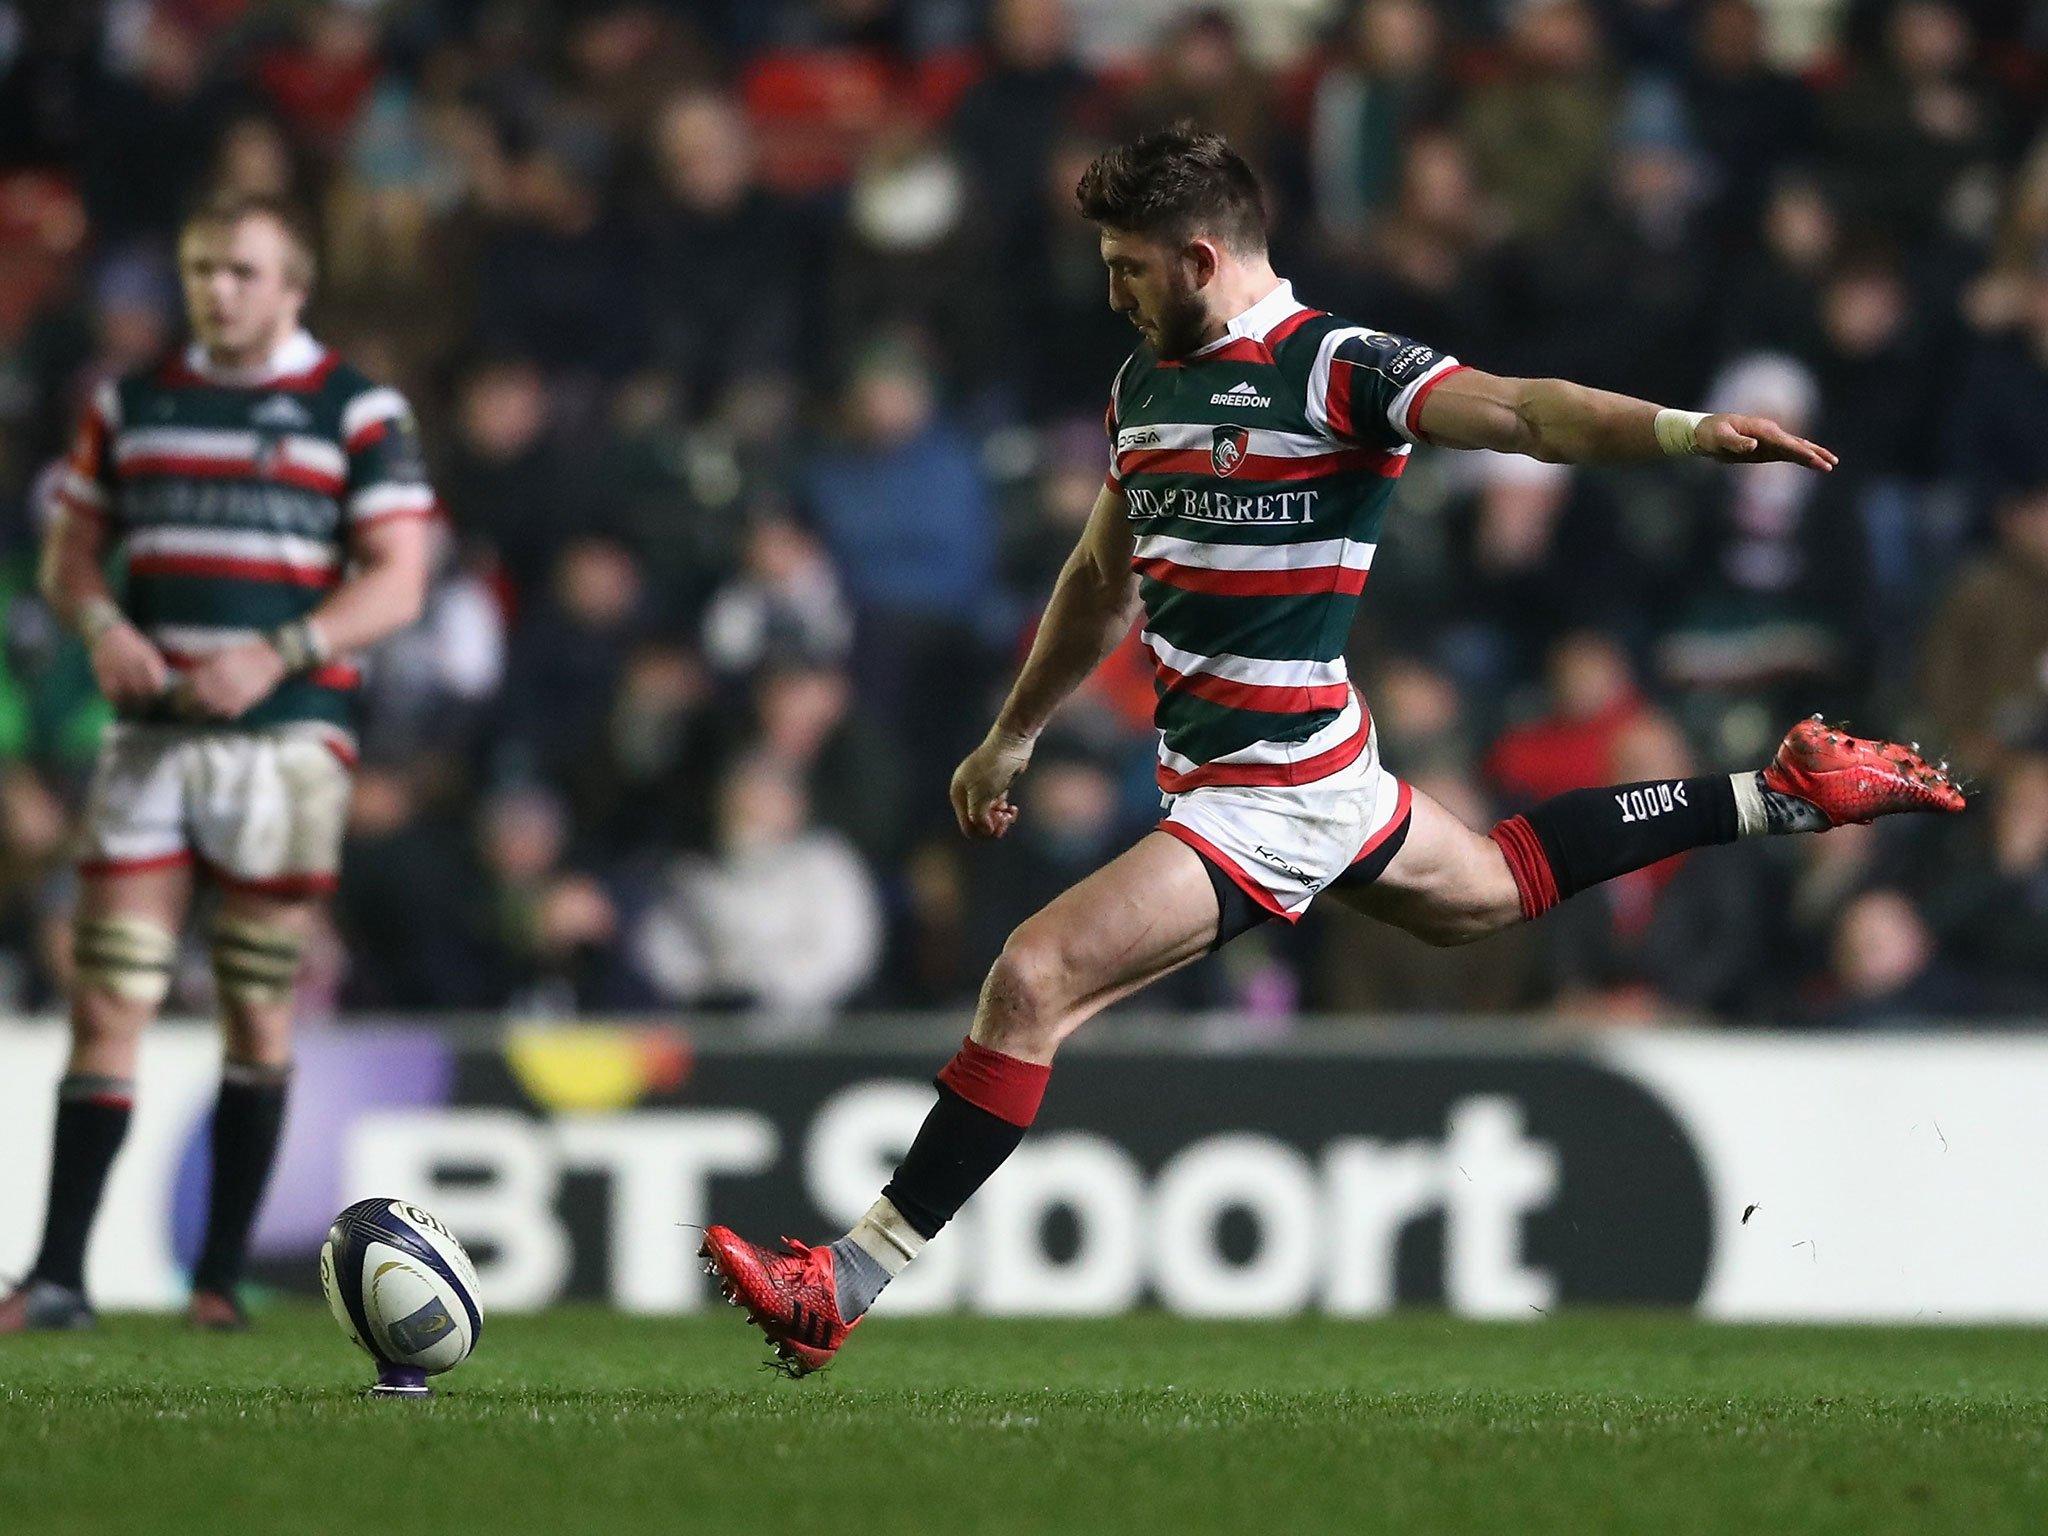 Leicester Tigers vs Munster match report: Owen Williams holds his